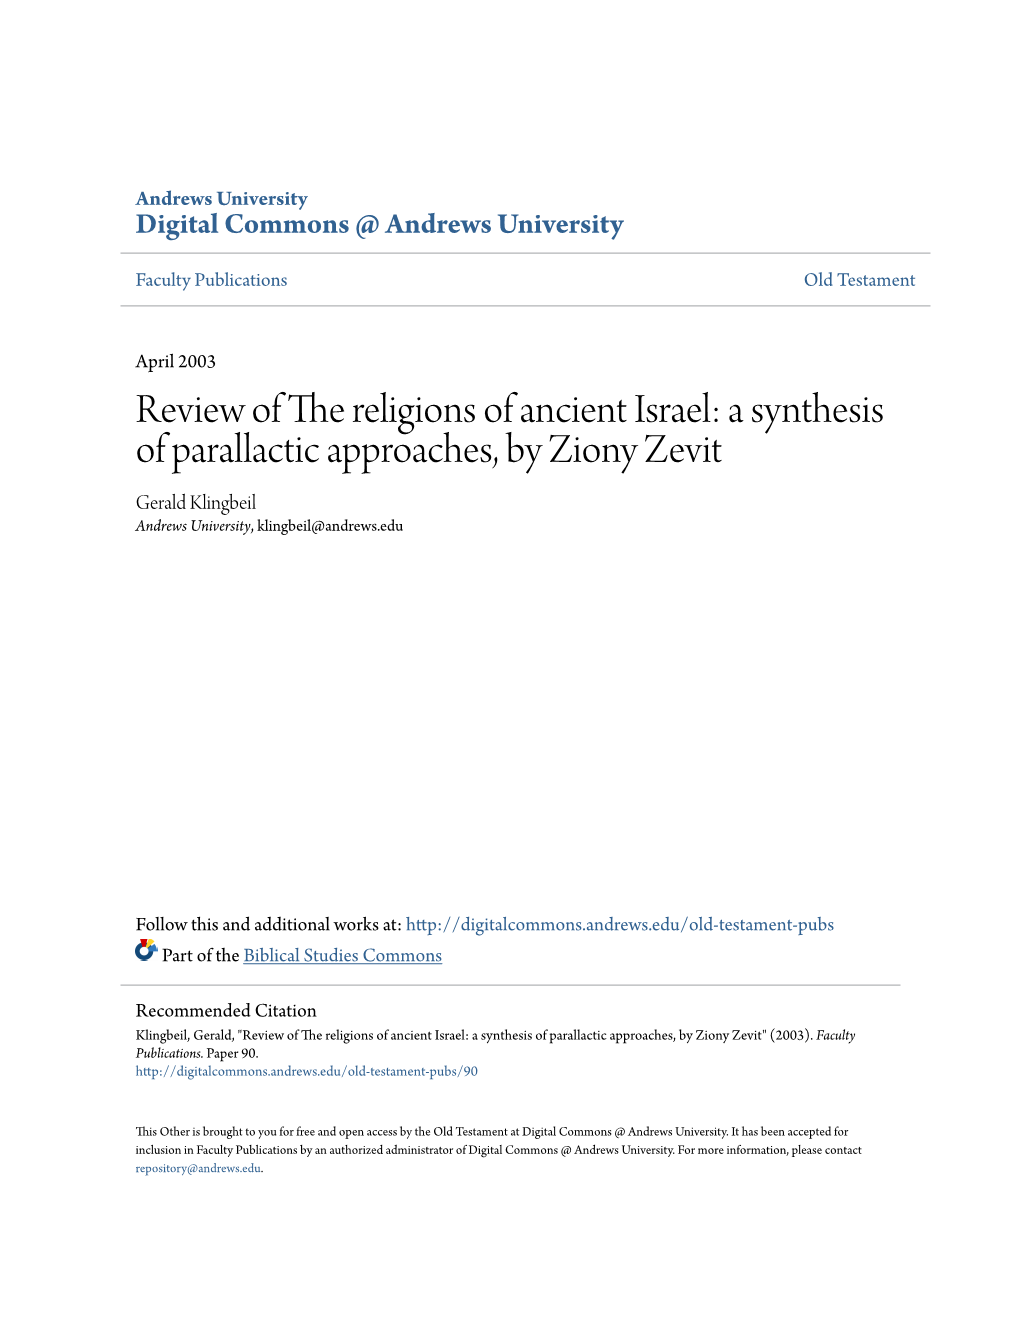 Review of the Religions of Ancient Israel